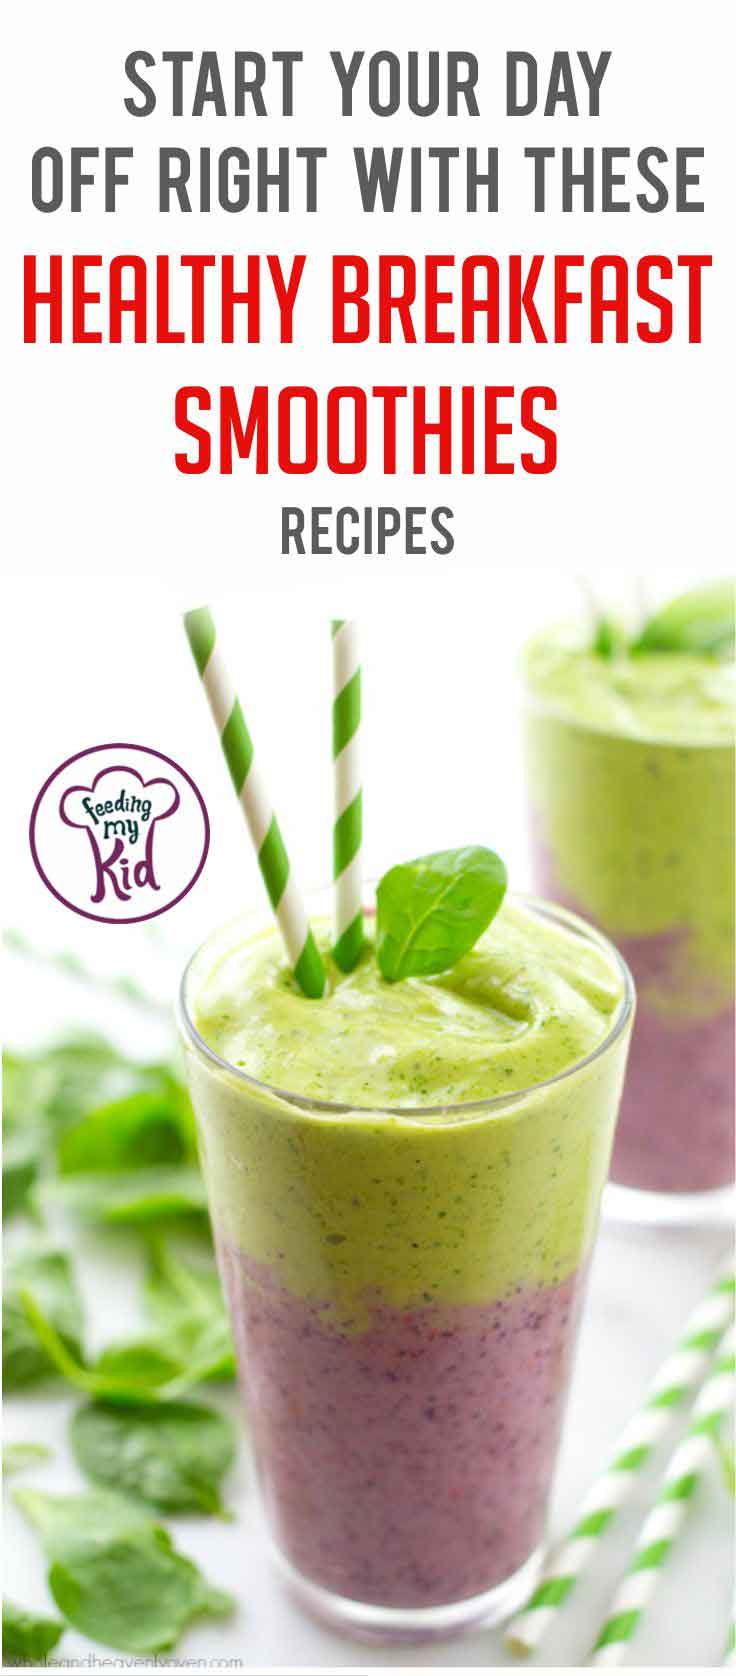 Healthy Breakfast Smoothies to Help Start Your Day off Right